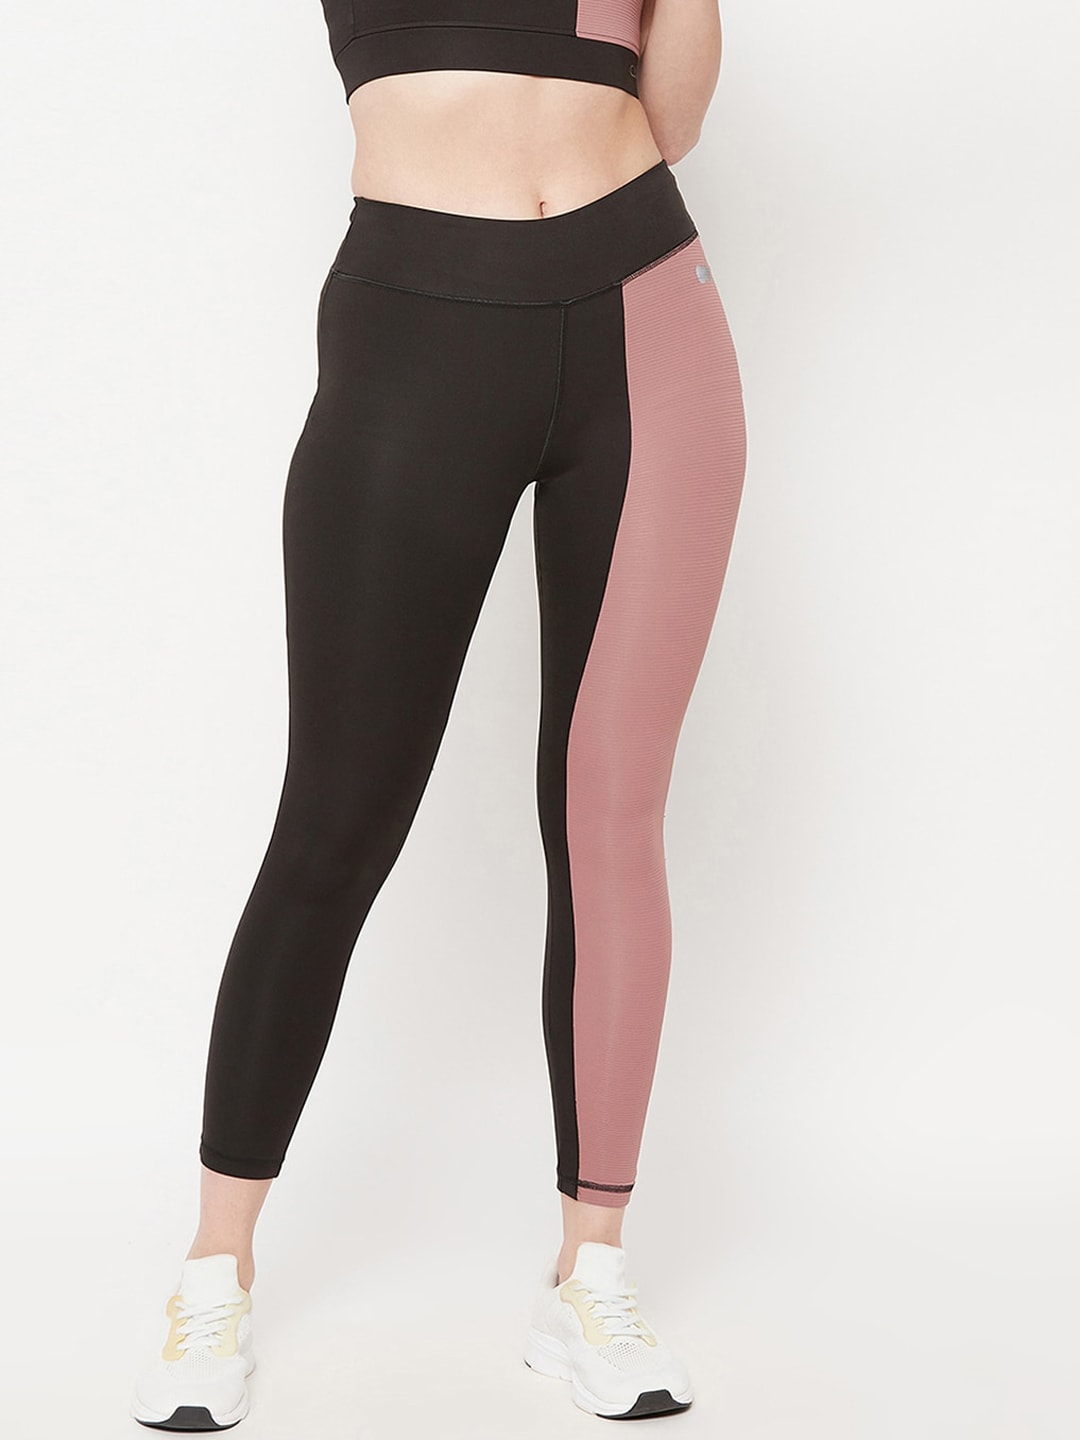 Clovia Coffee Brown & Pink Snug Fit Active High-Rise Ankle-Length Colourblock Tights Price in India